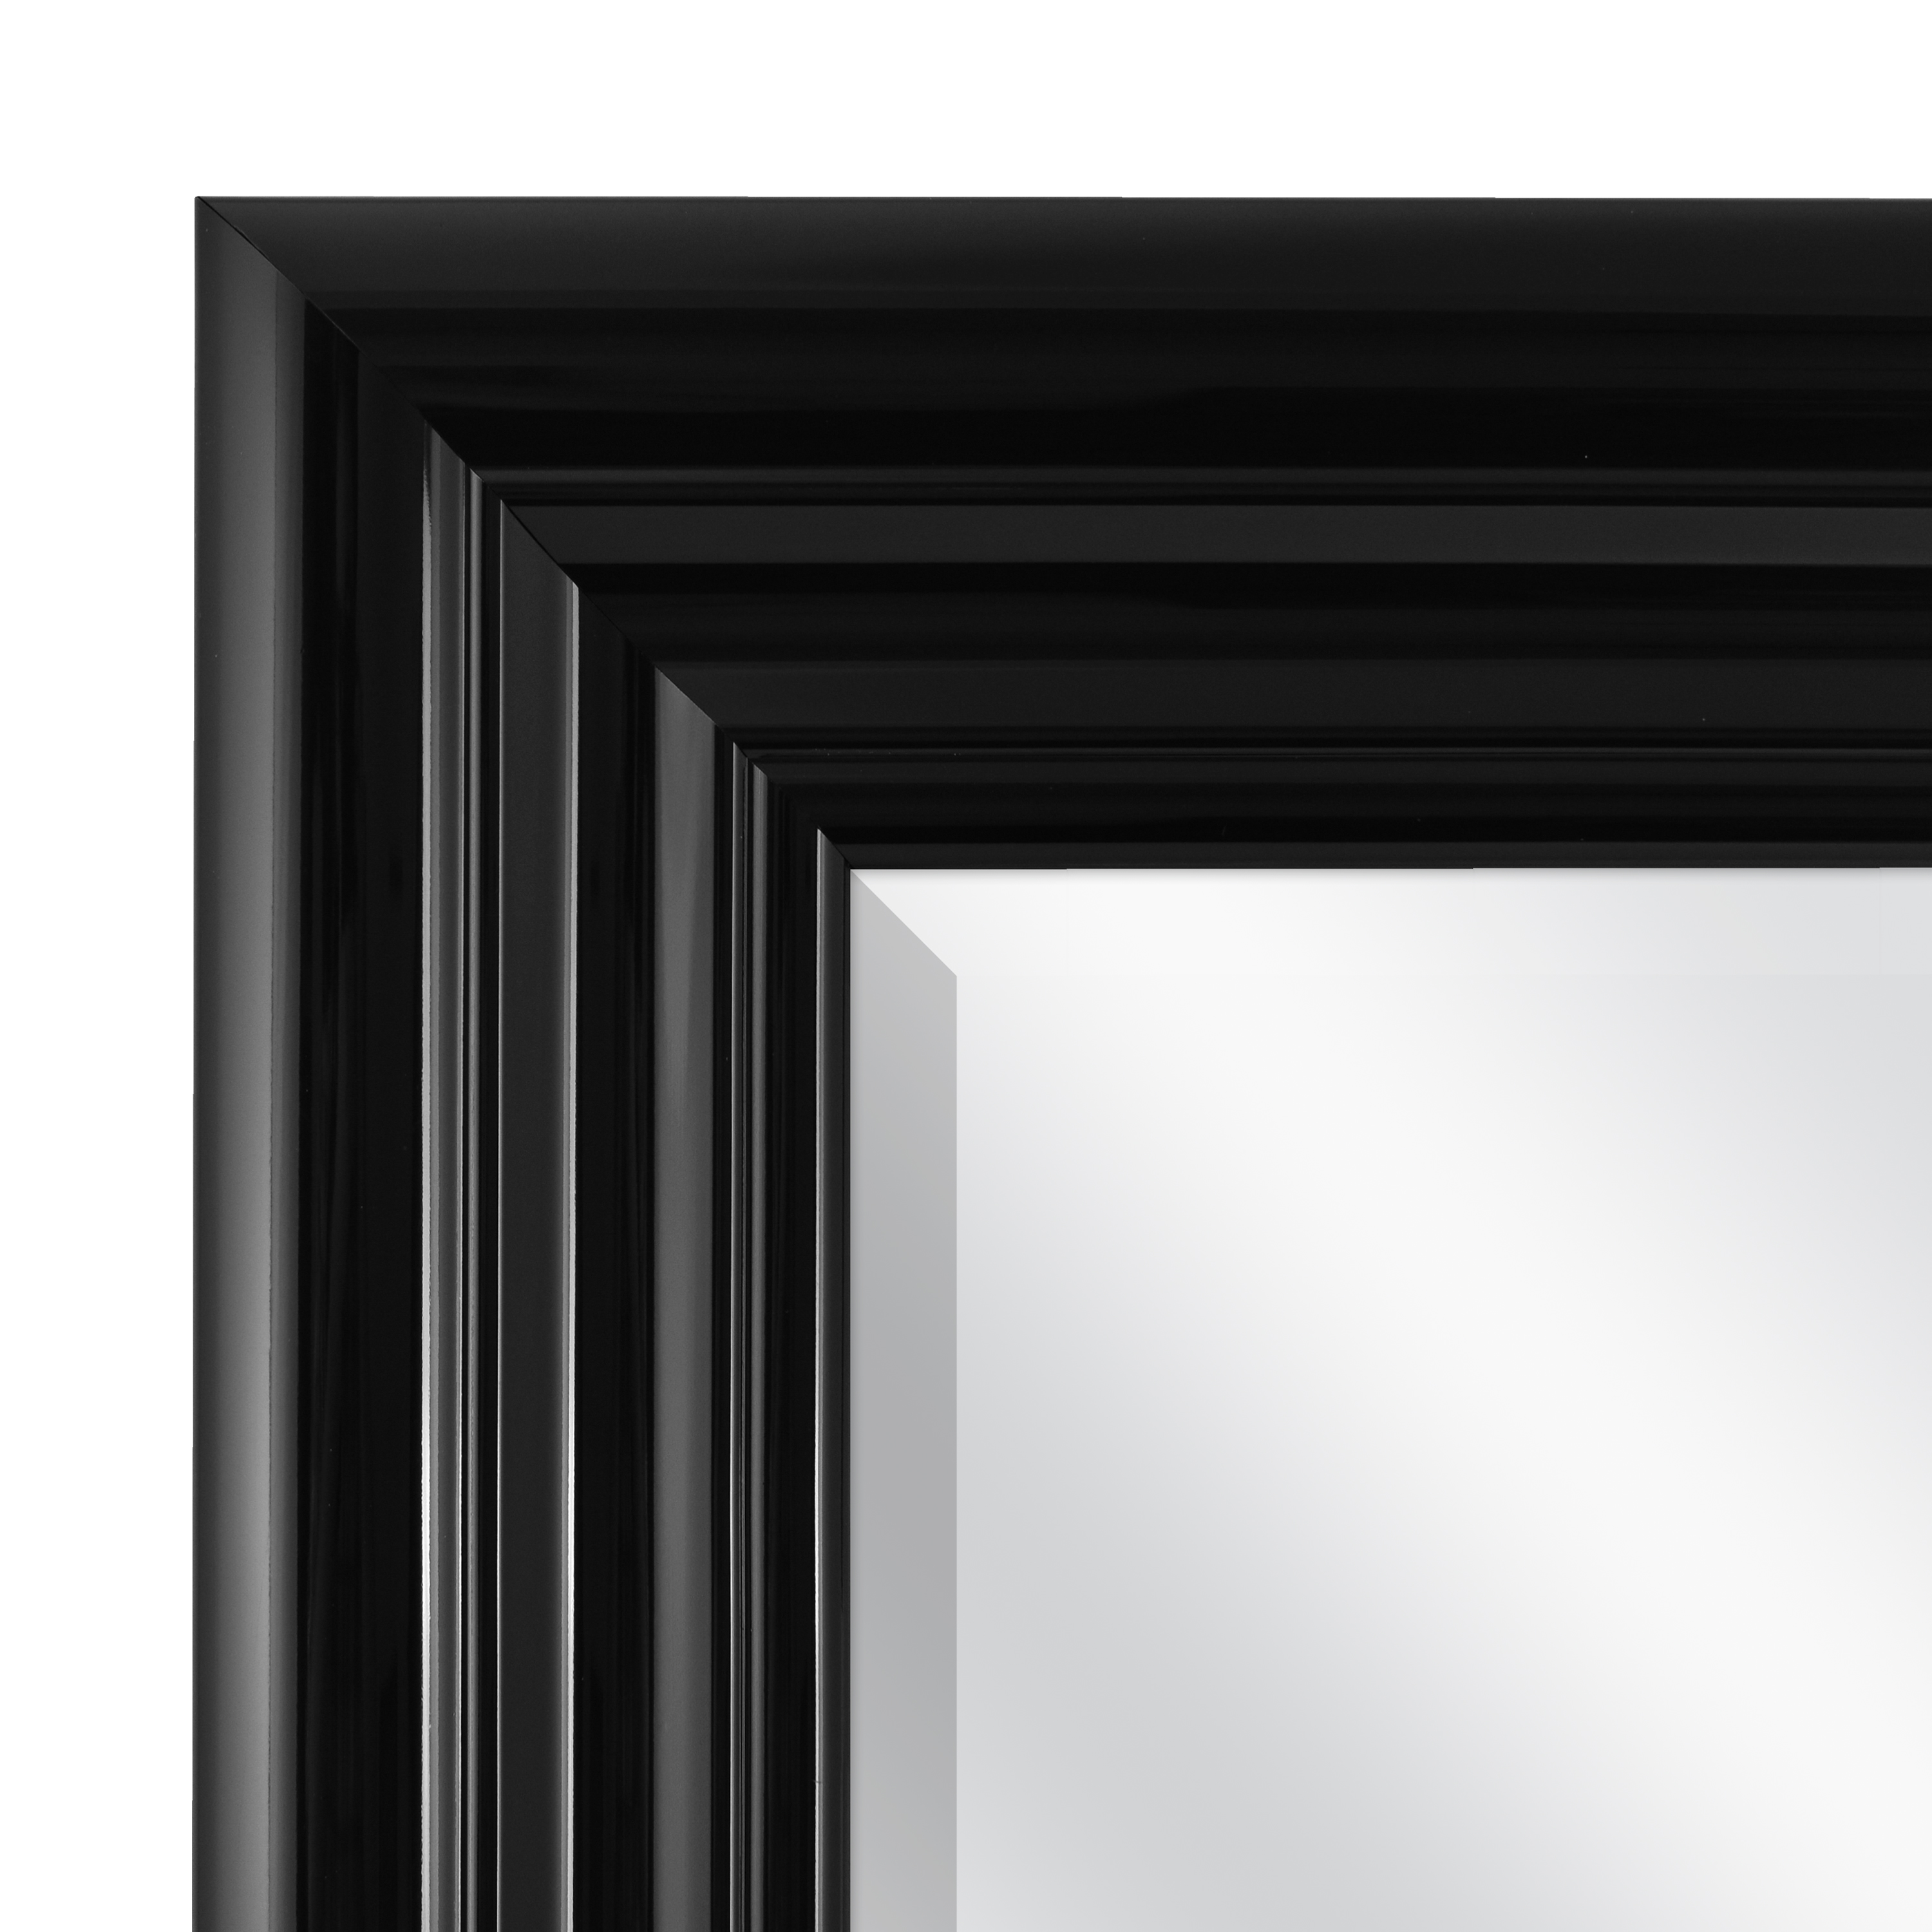 Better Homes & Gardens 23x27 Inch Black Beveled Wall Mirror - image 2 of 6